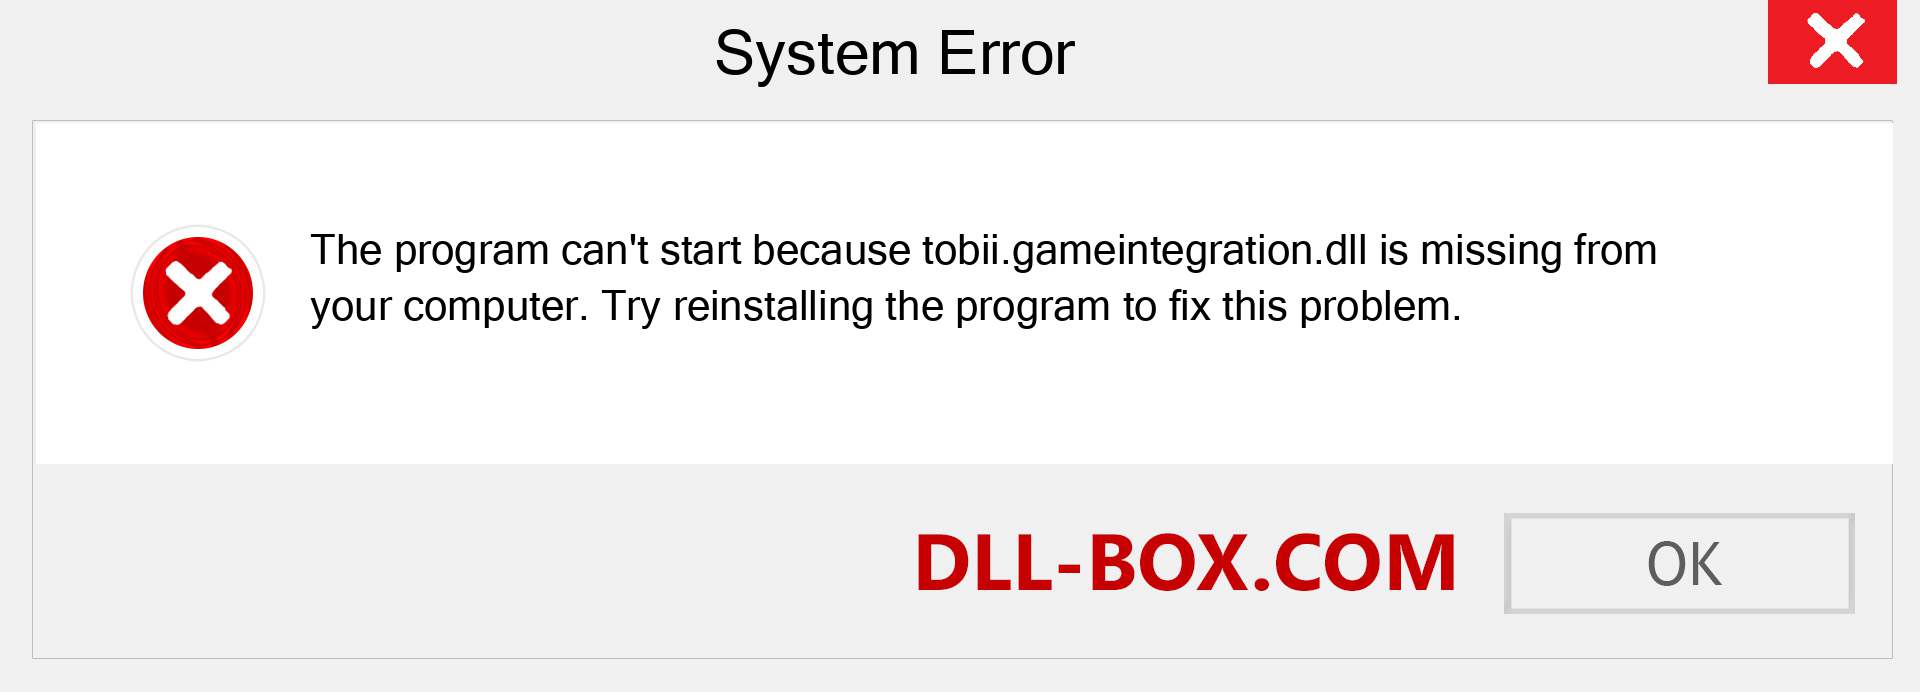  tobii.gameintegration.dll file is missing?. Download for Windows 7, 8, 10 - Fix  tobii.gameintegration dll Missing Error on Windows, photos, images